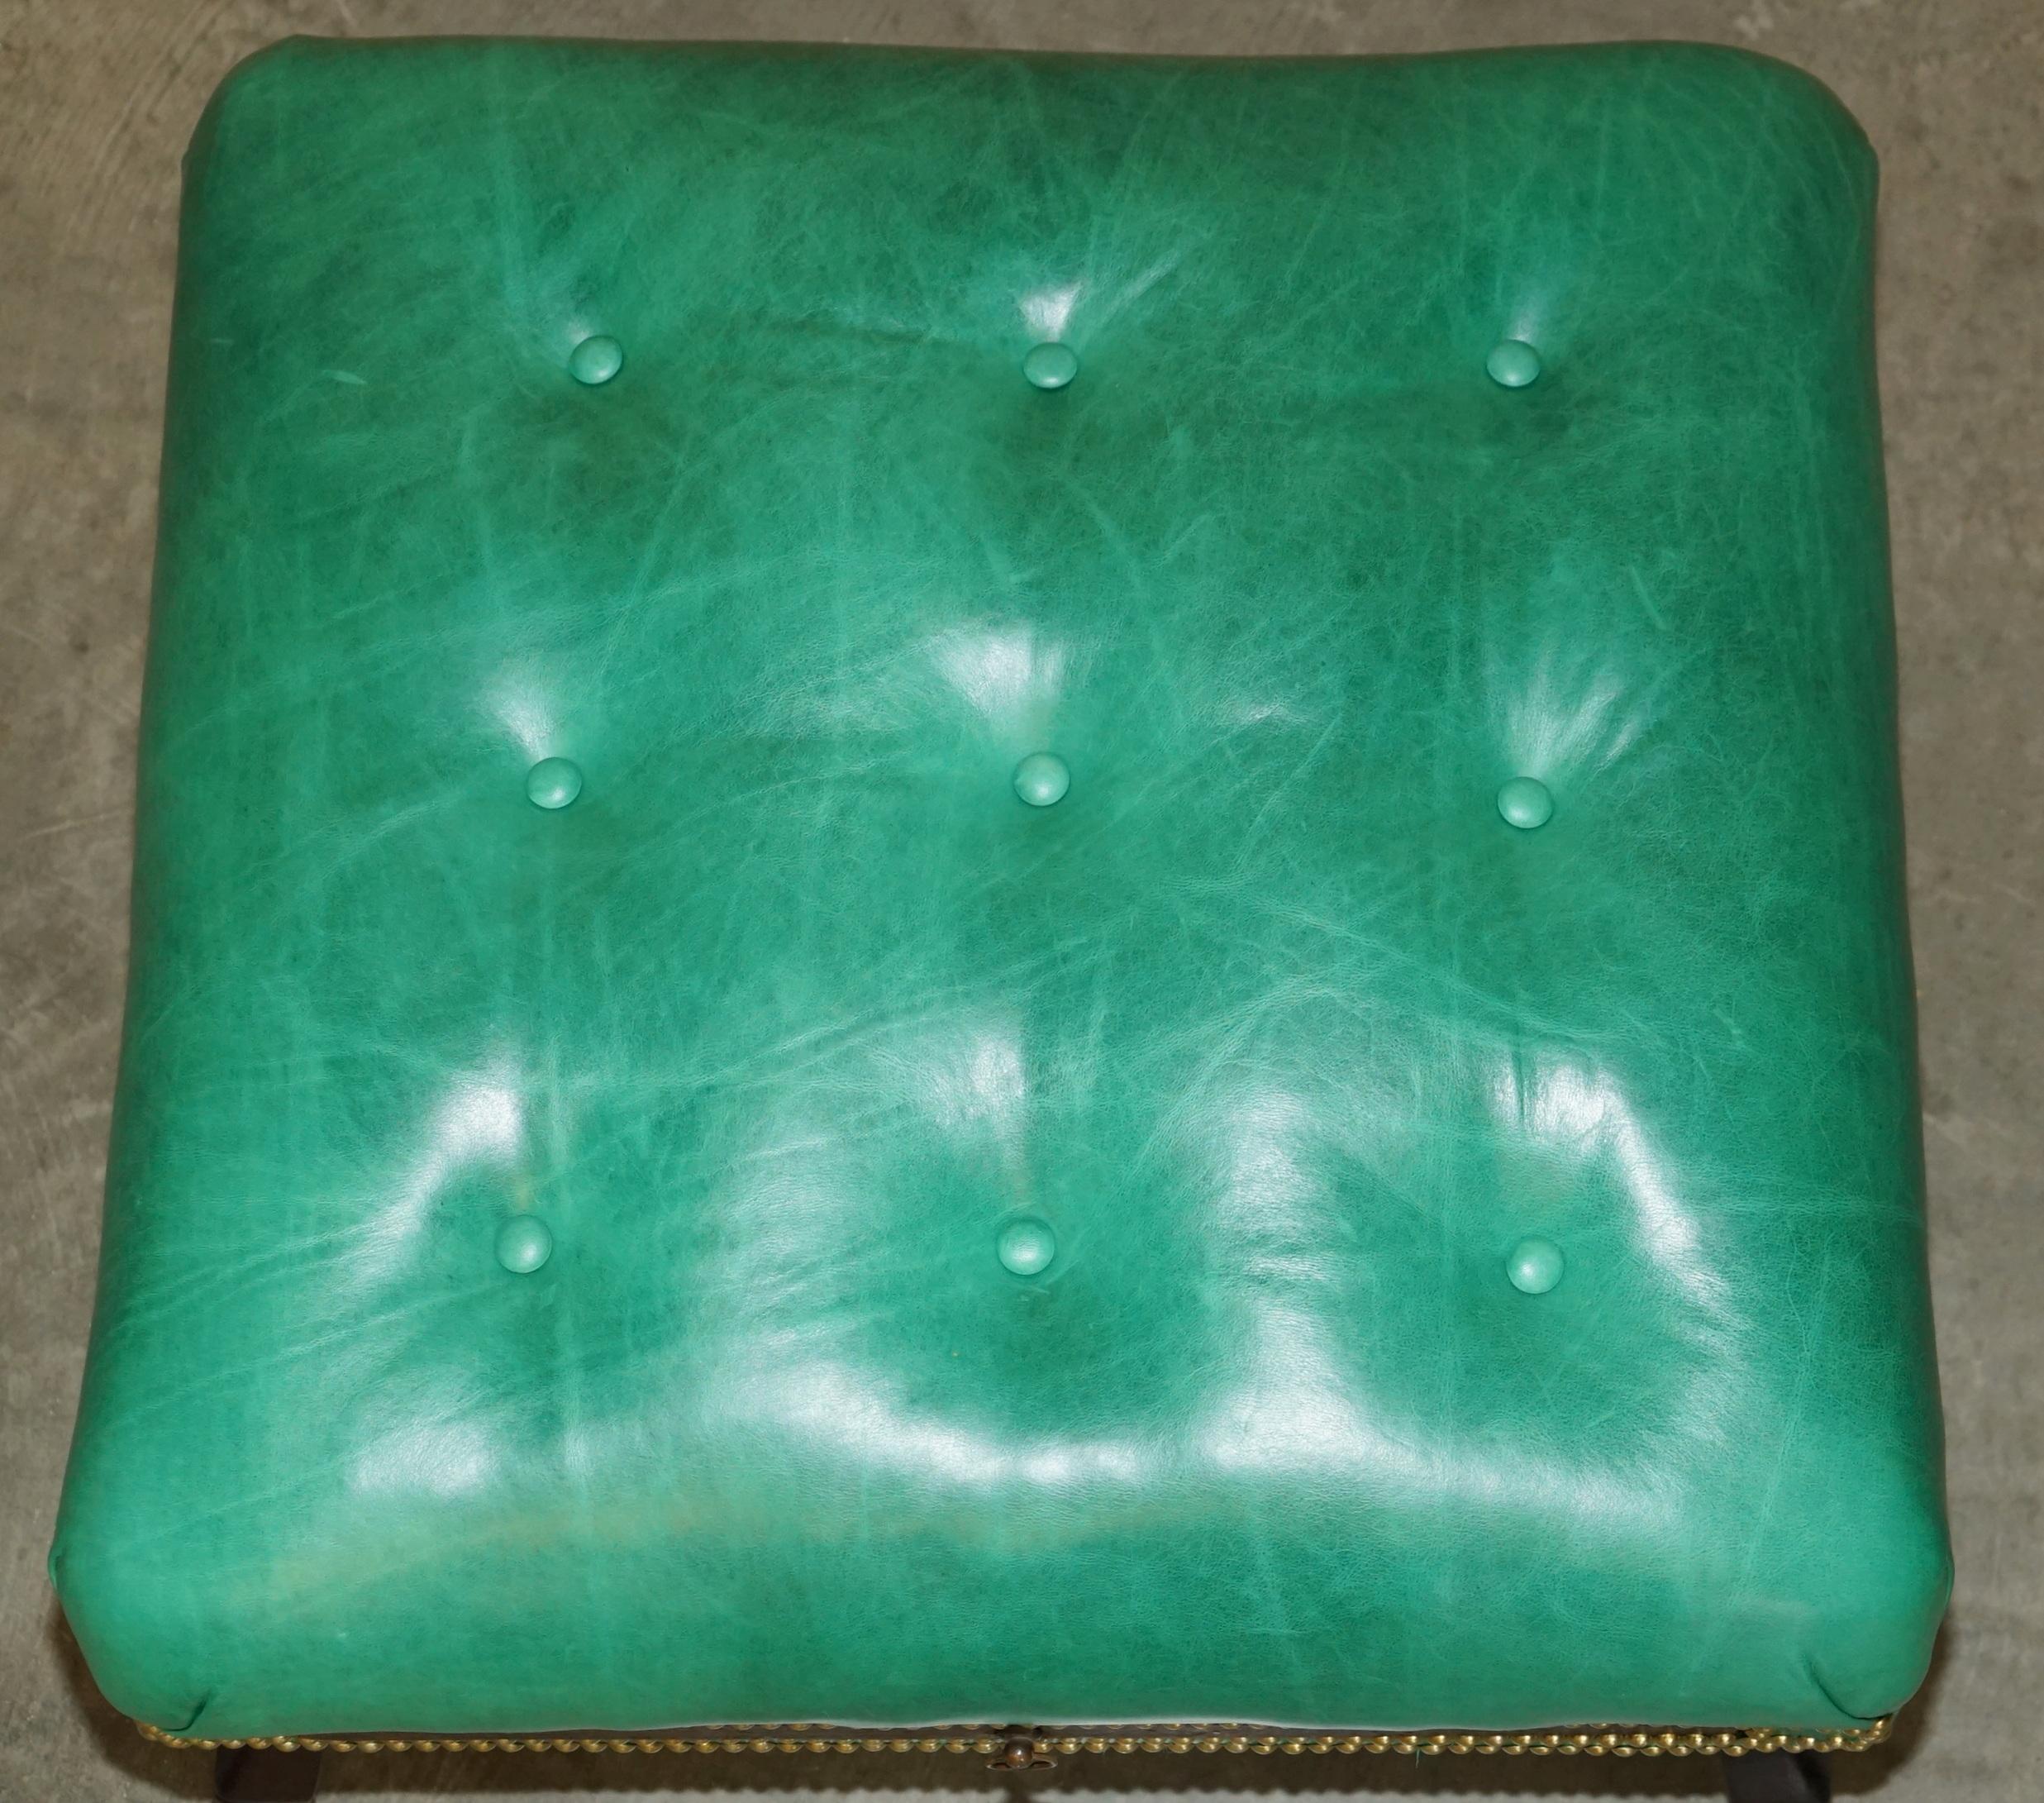 RARE ANTIQUE GEORGIAN 1760 CHESTERFIELD LEATHER FOOTSTOOL WiTH SLIP SERVING TRAY For Sale 5